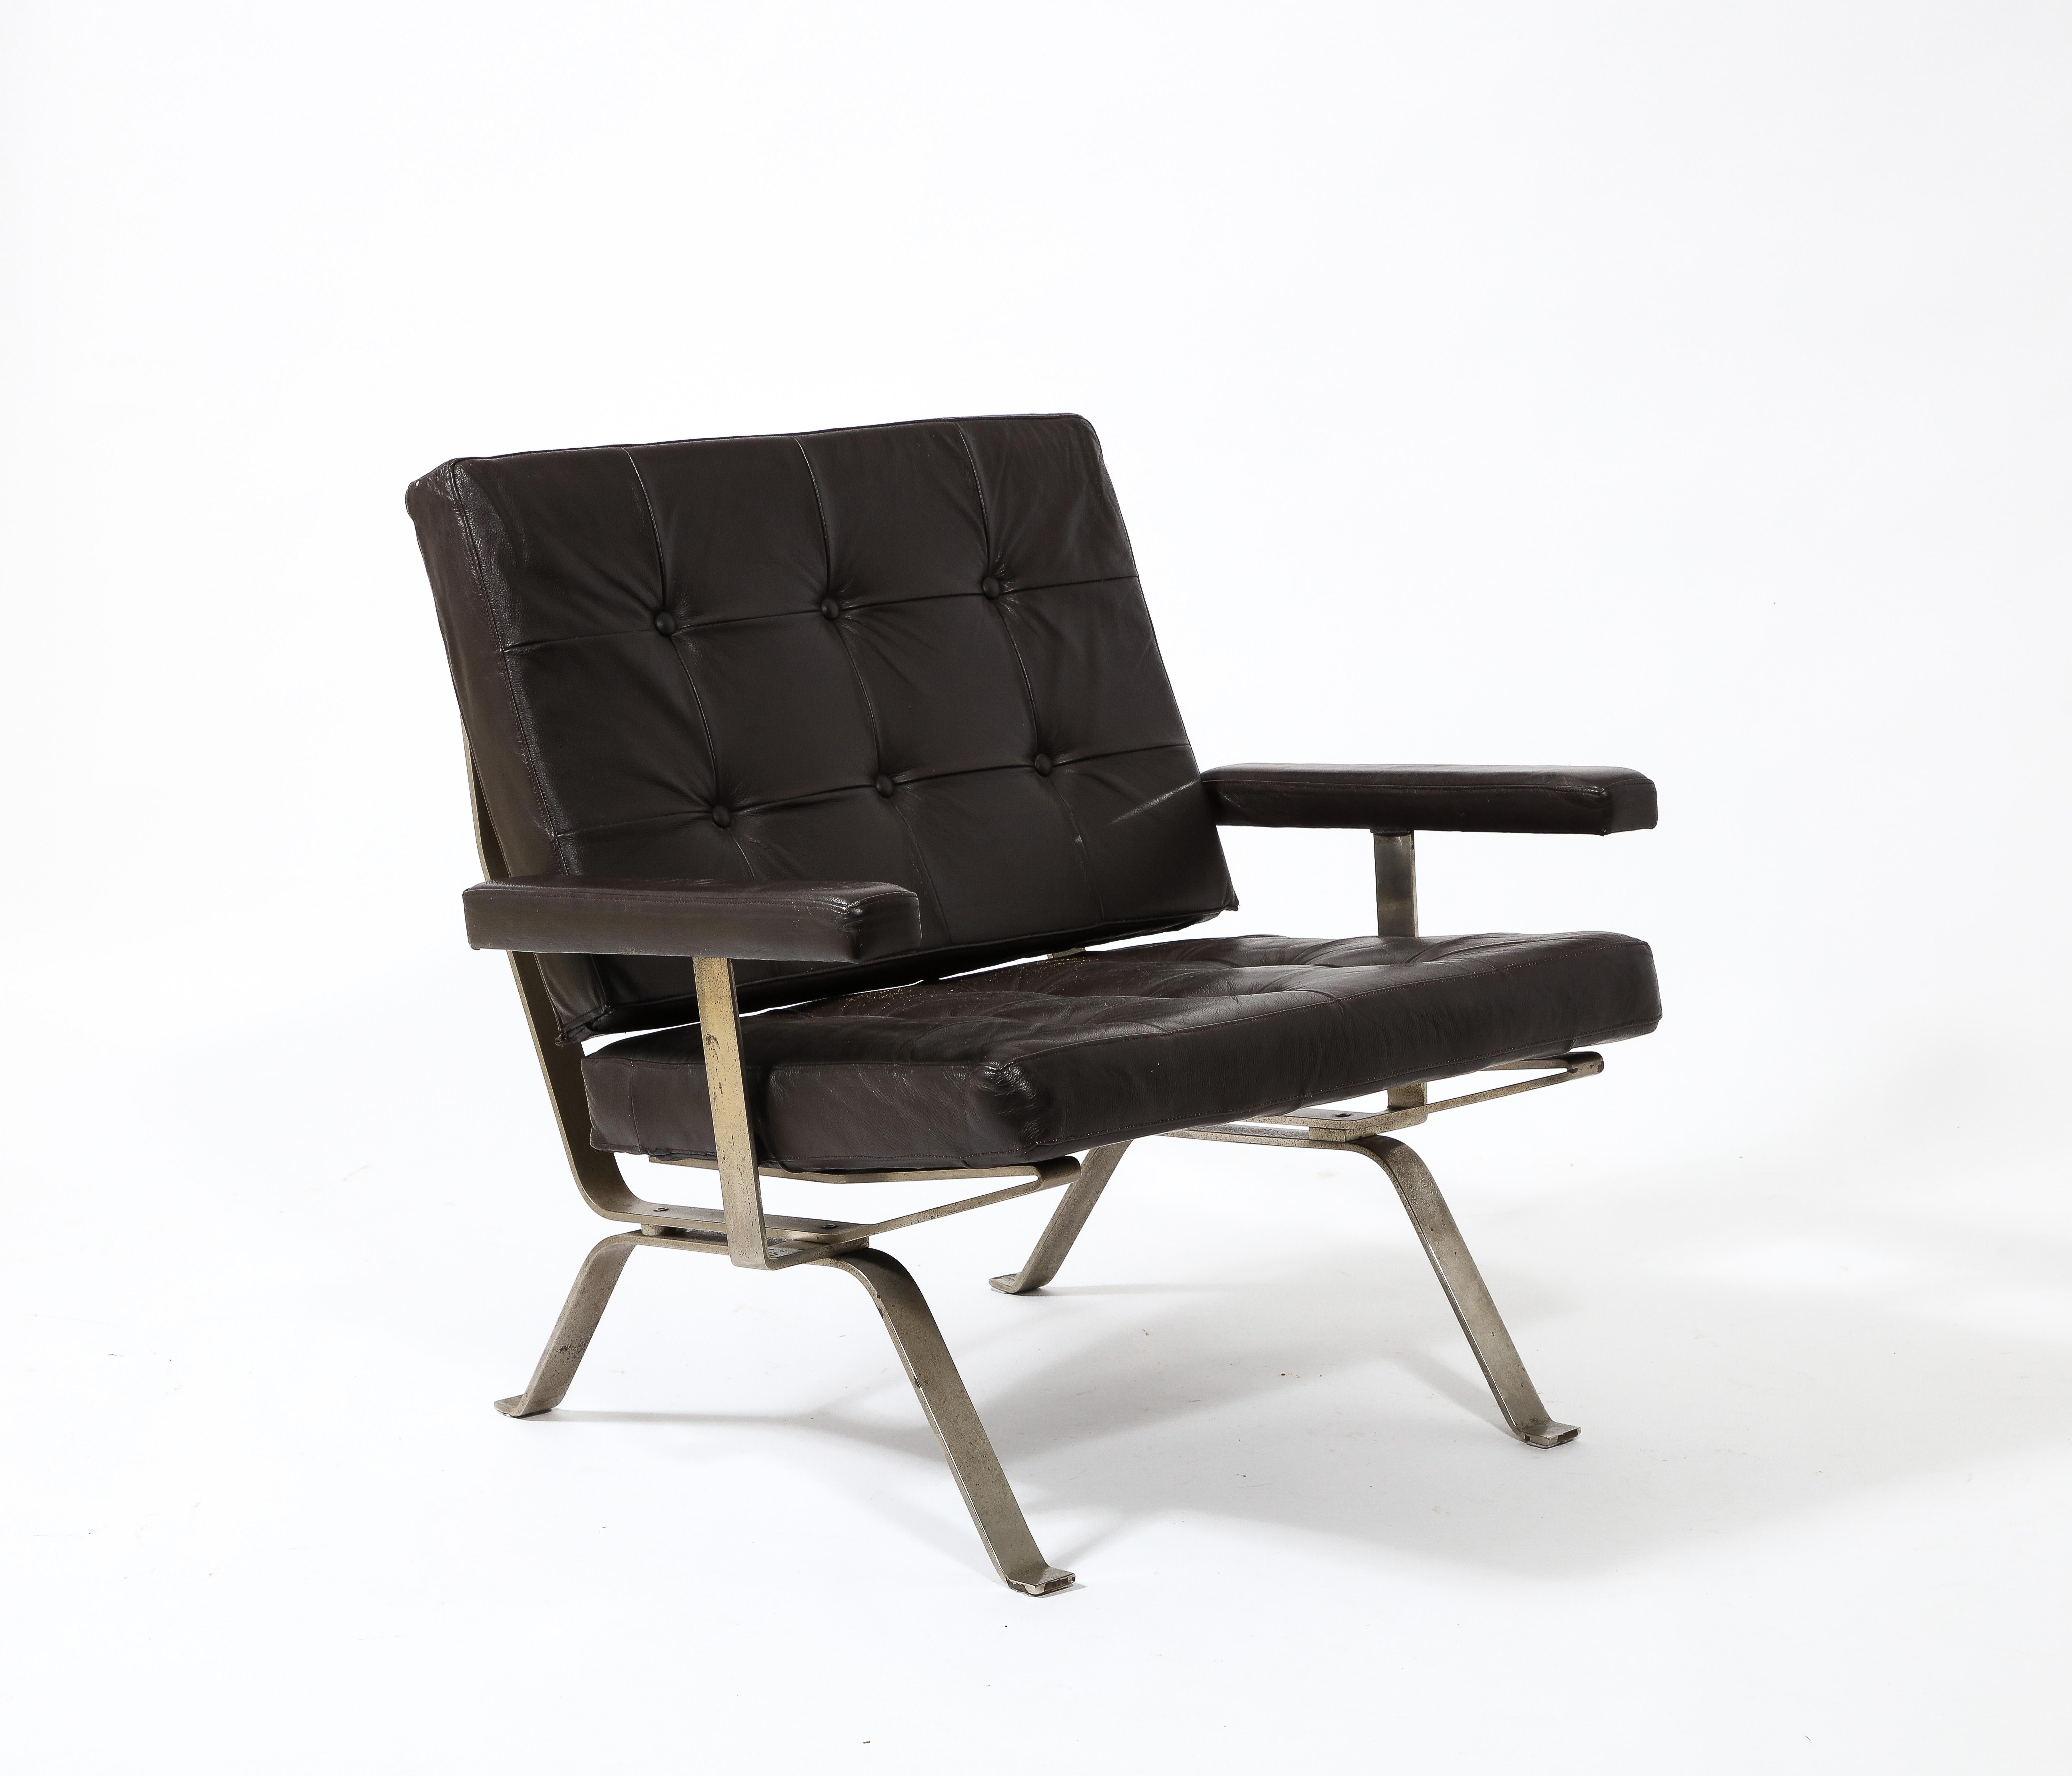 Bauhaus Style Visitor Lounge Chair in Black Leather, Germany 1960's For Sale 4